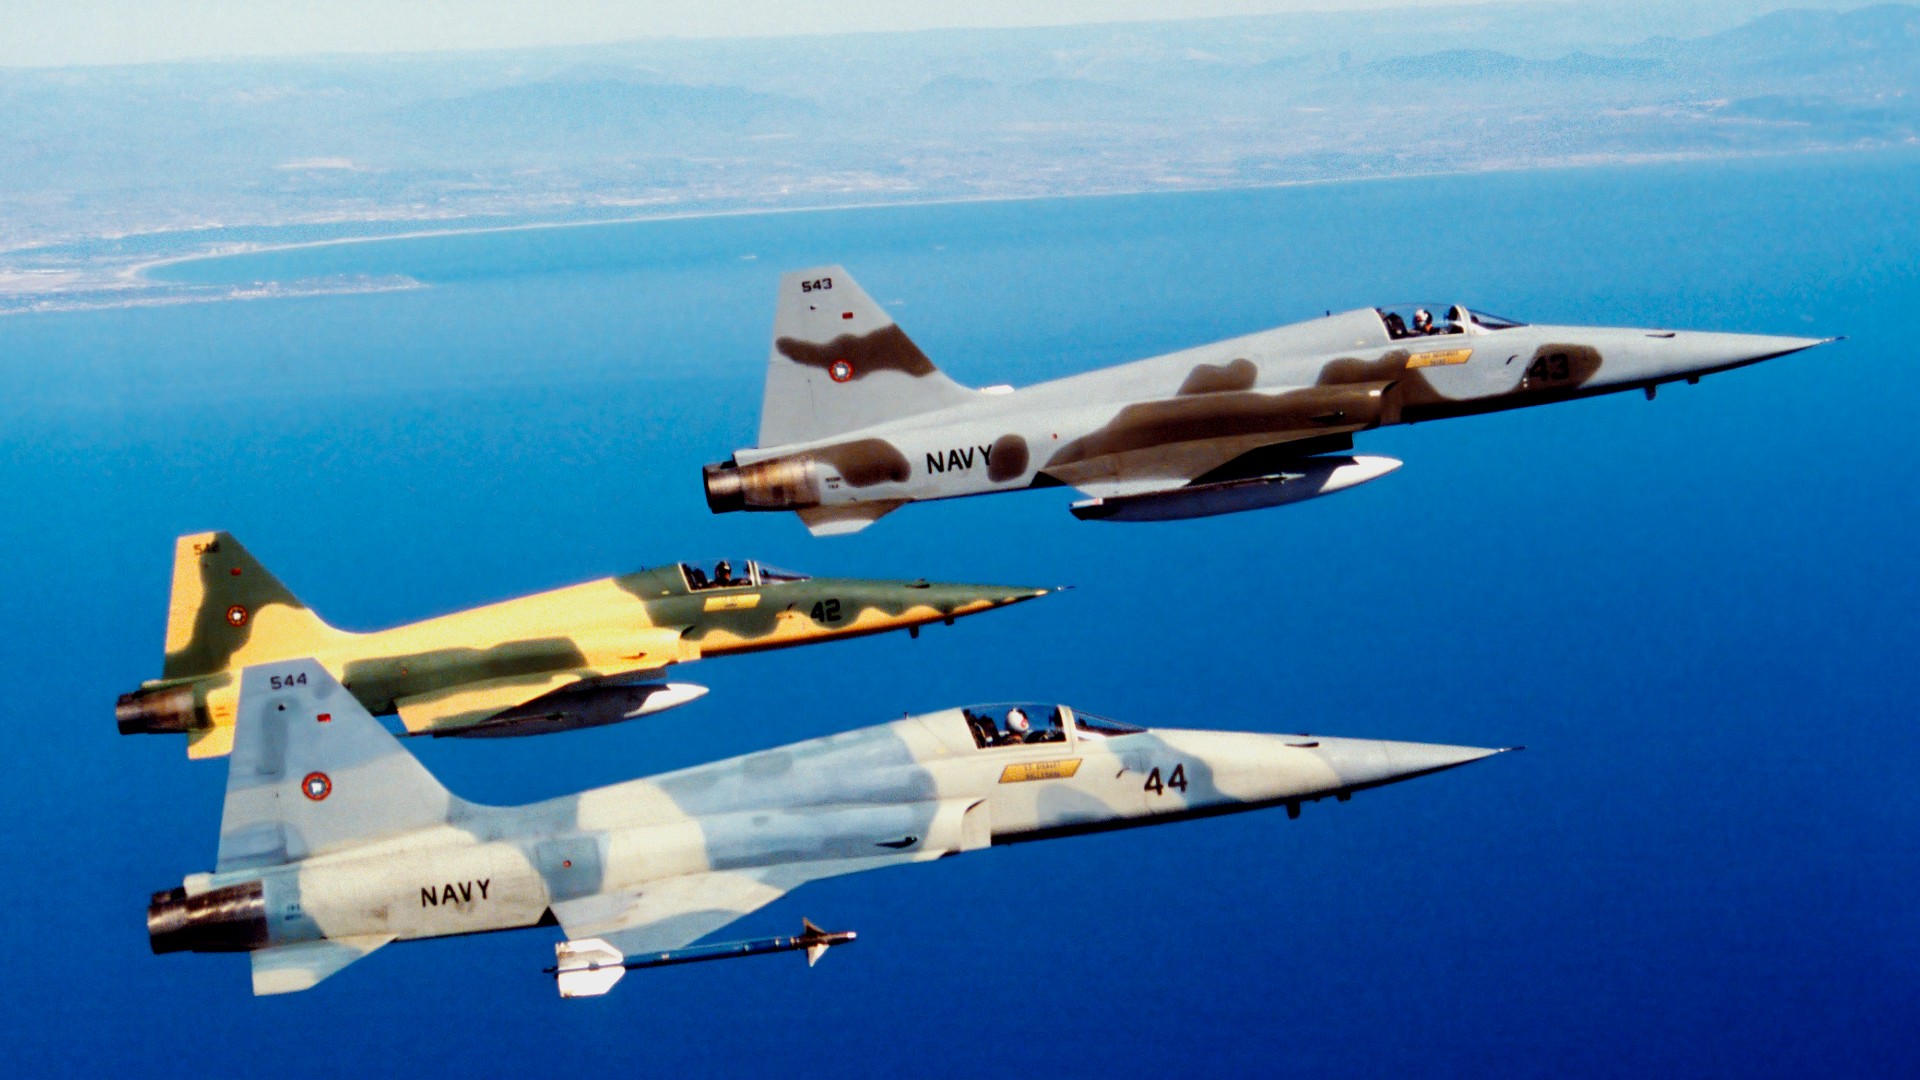 Northrop F-5s were ideal ‘aggressors’ for Top Gun, being smaller and nimbler than most US fighters.